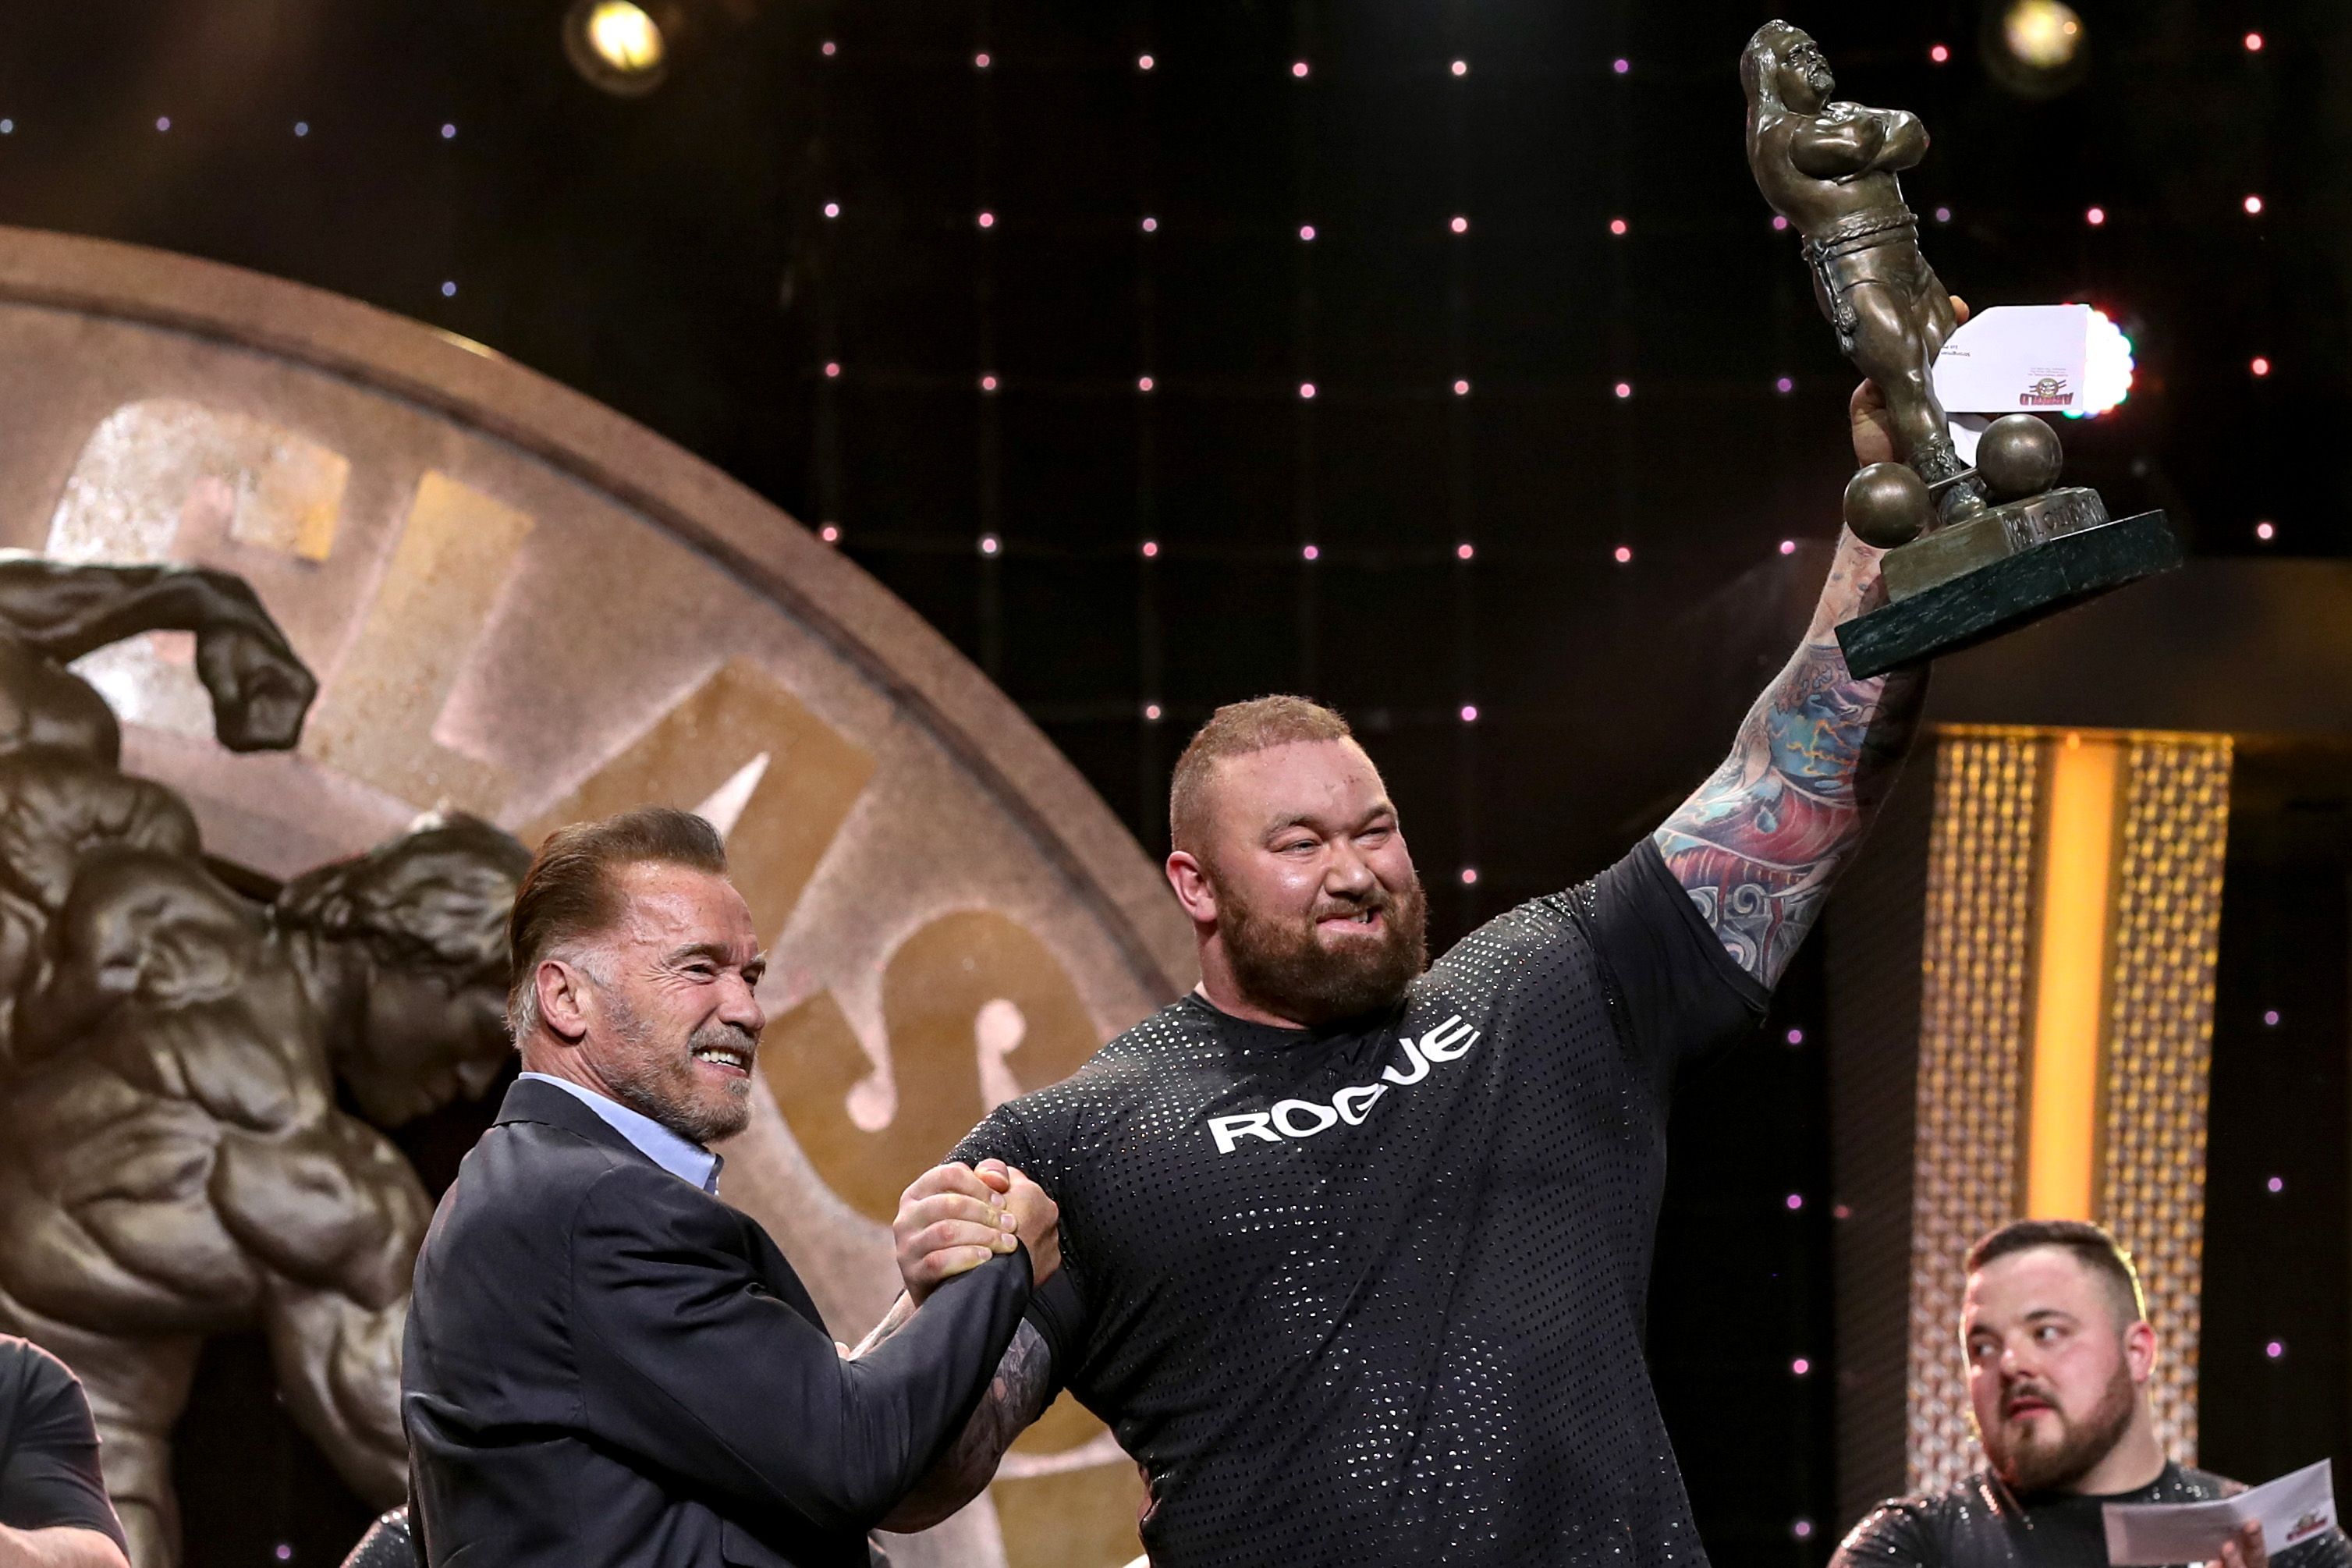 Arnold Schwarzenegger presents a trophy to the Arnold Strongman Classic winner, who holds it in the air